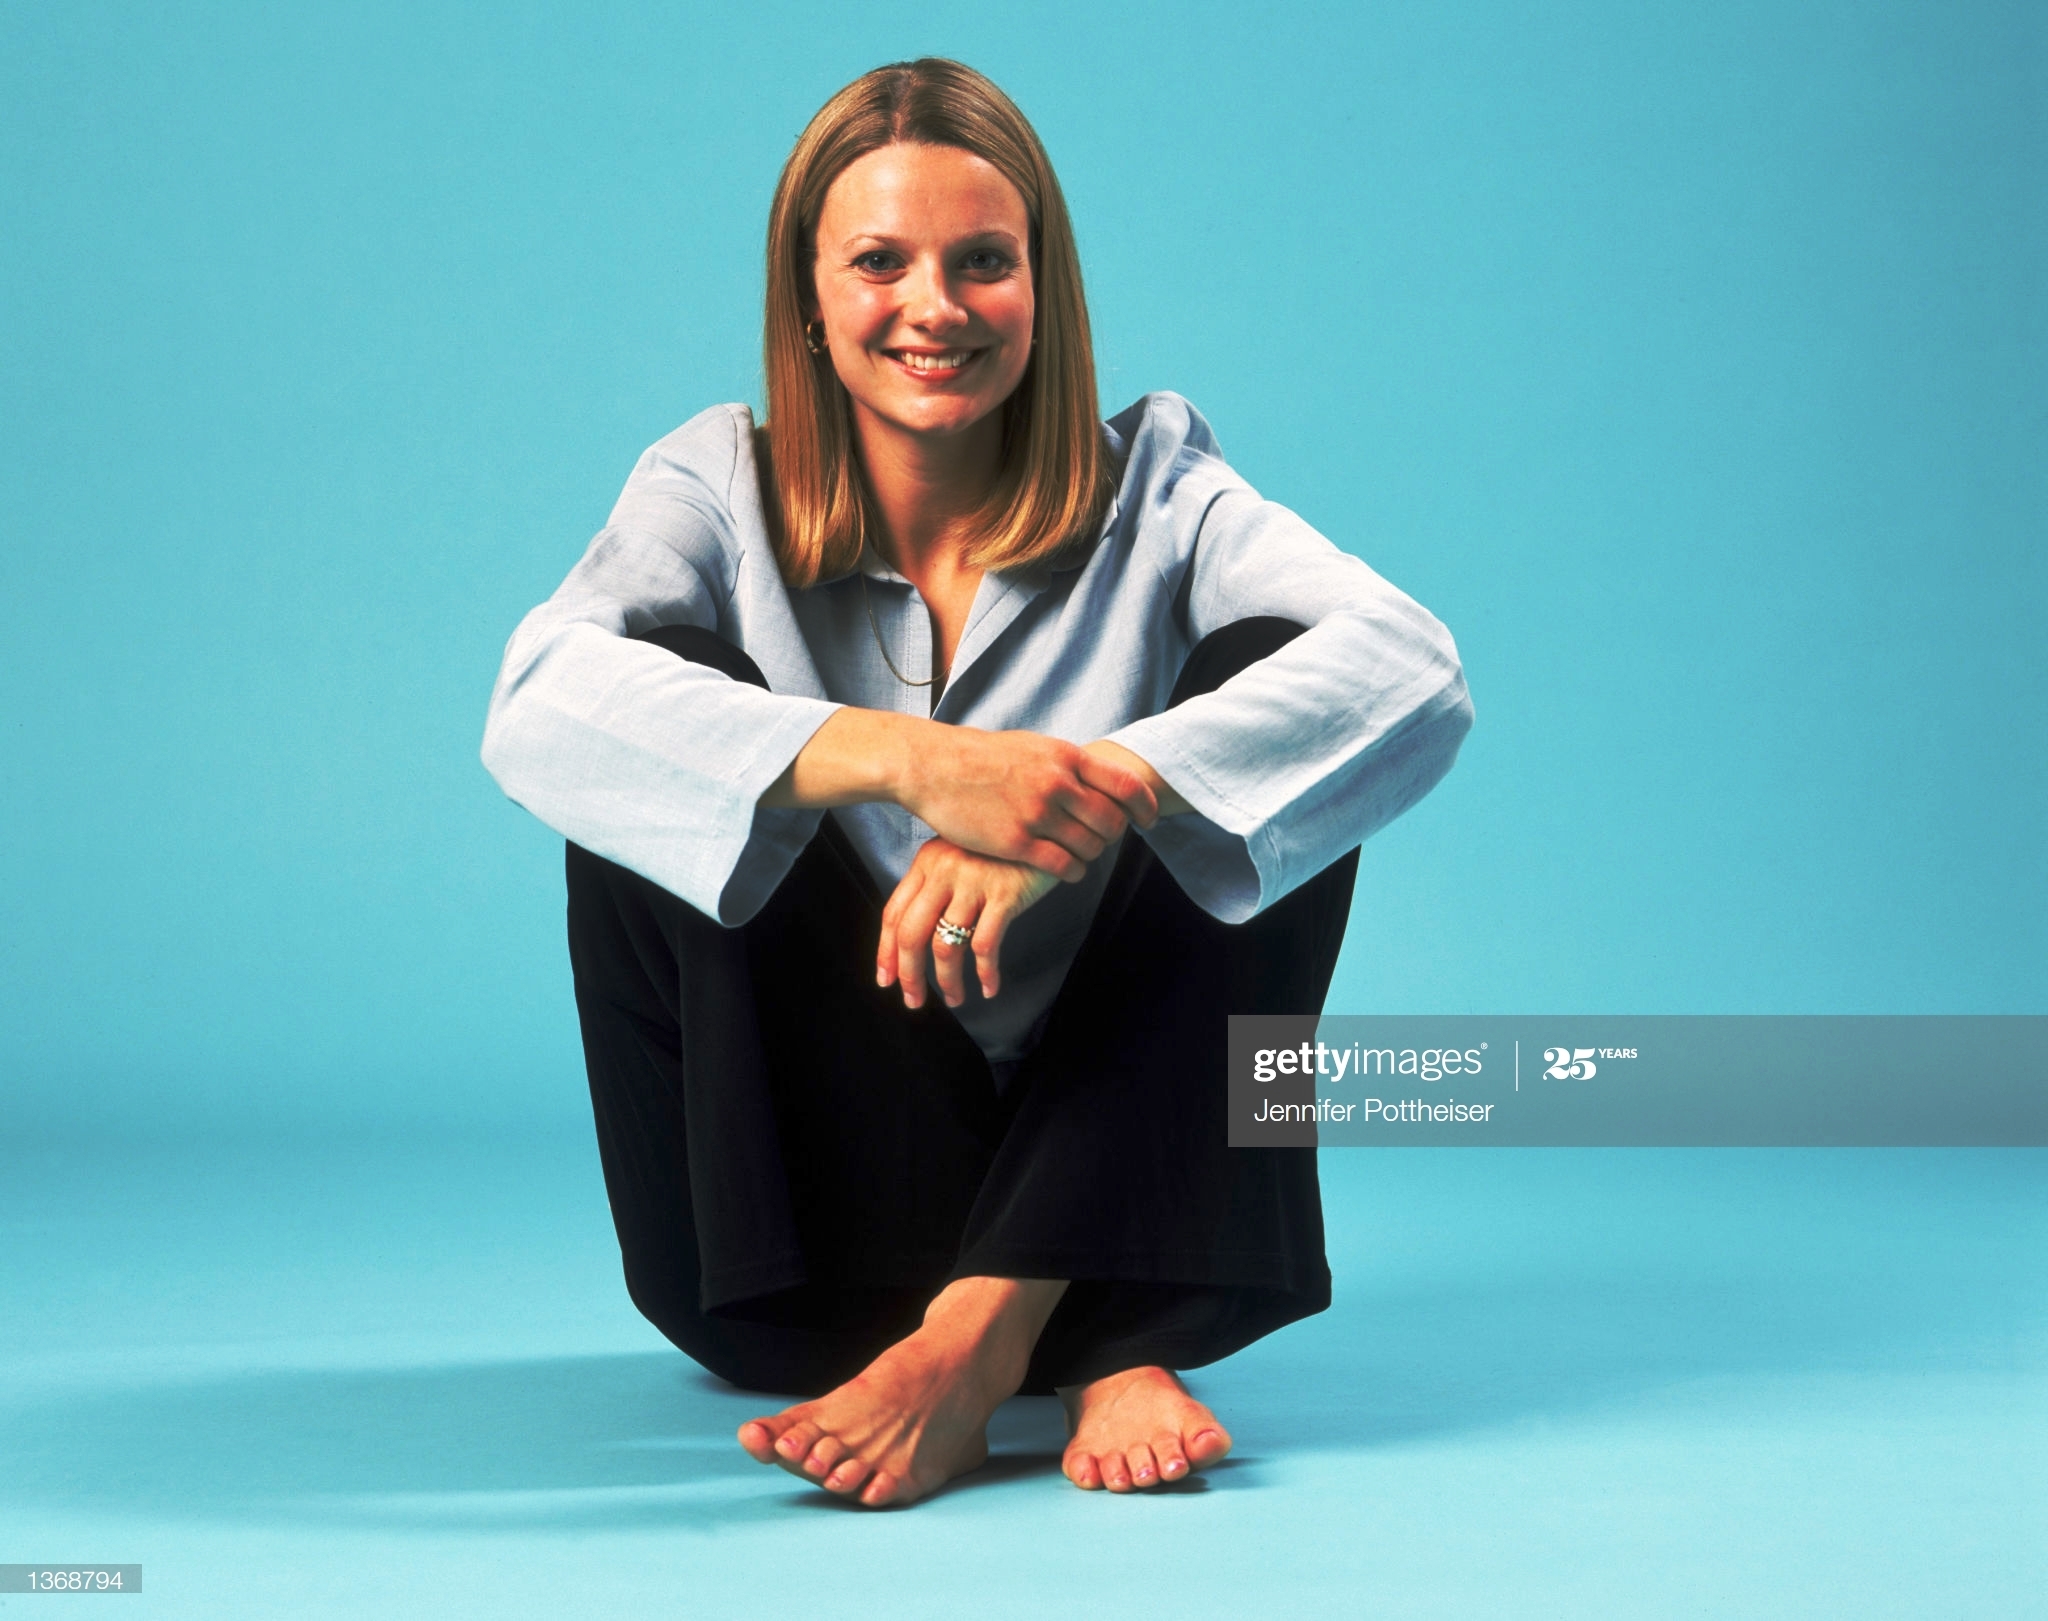 Stacey dales feet